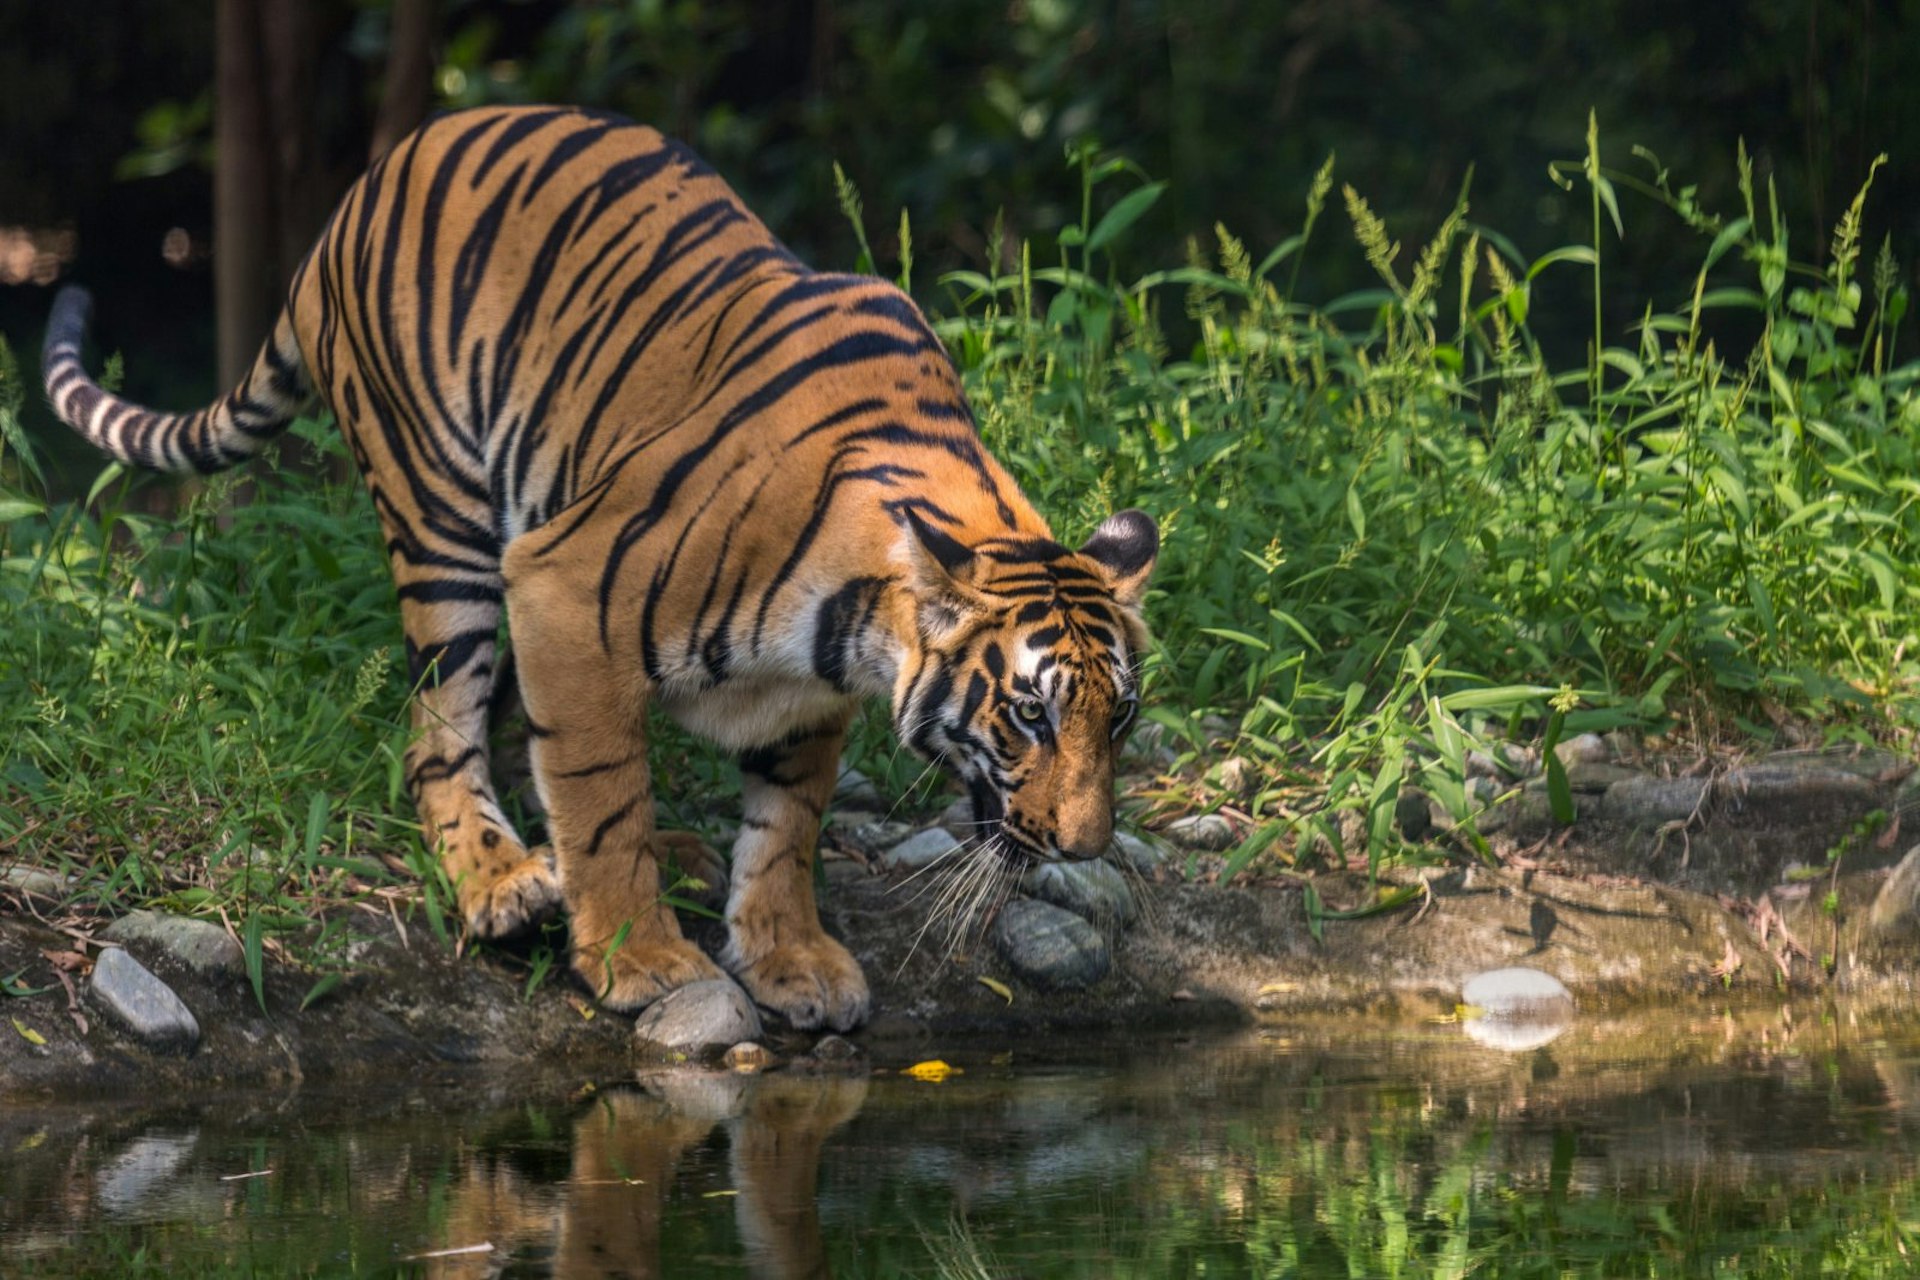 A tiger lowering its head to the water